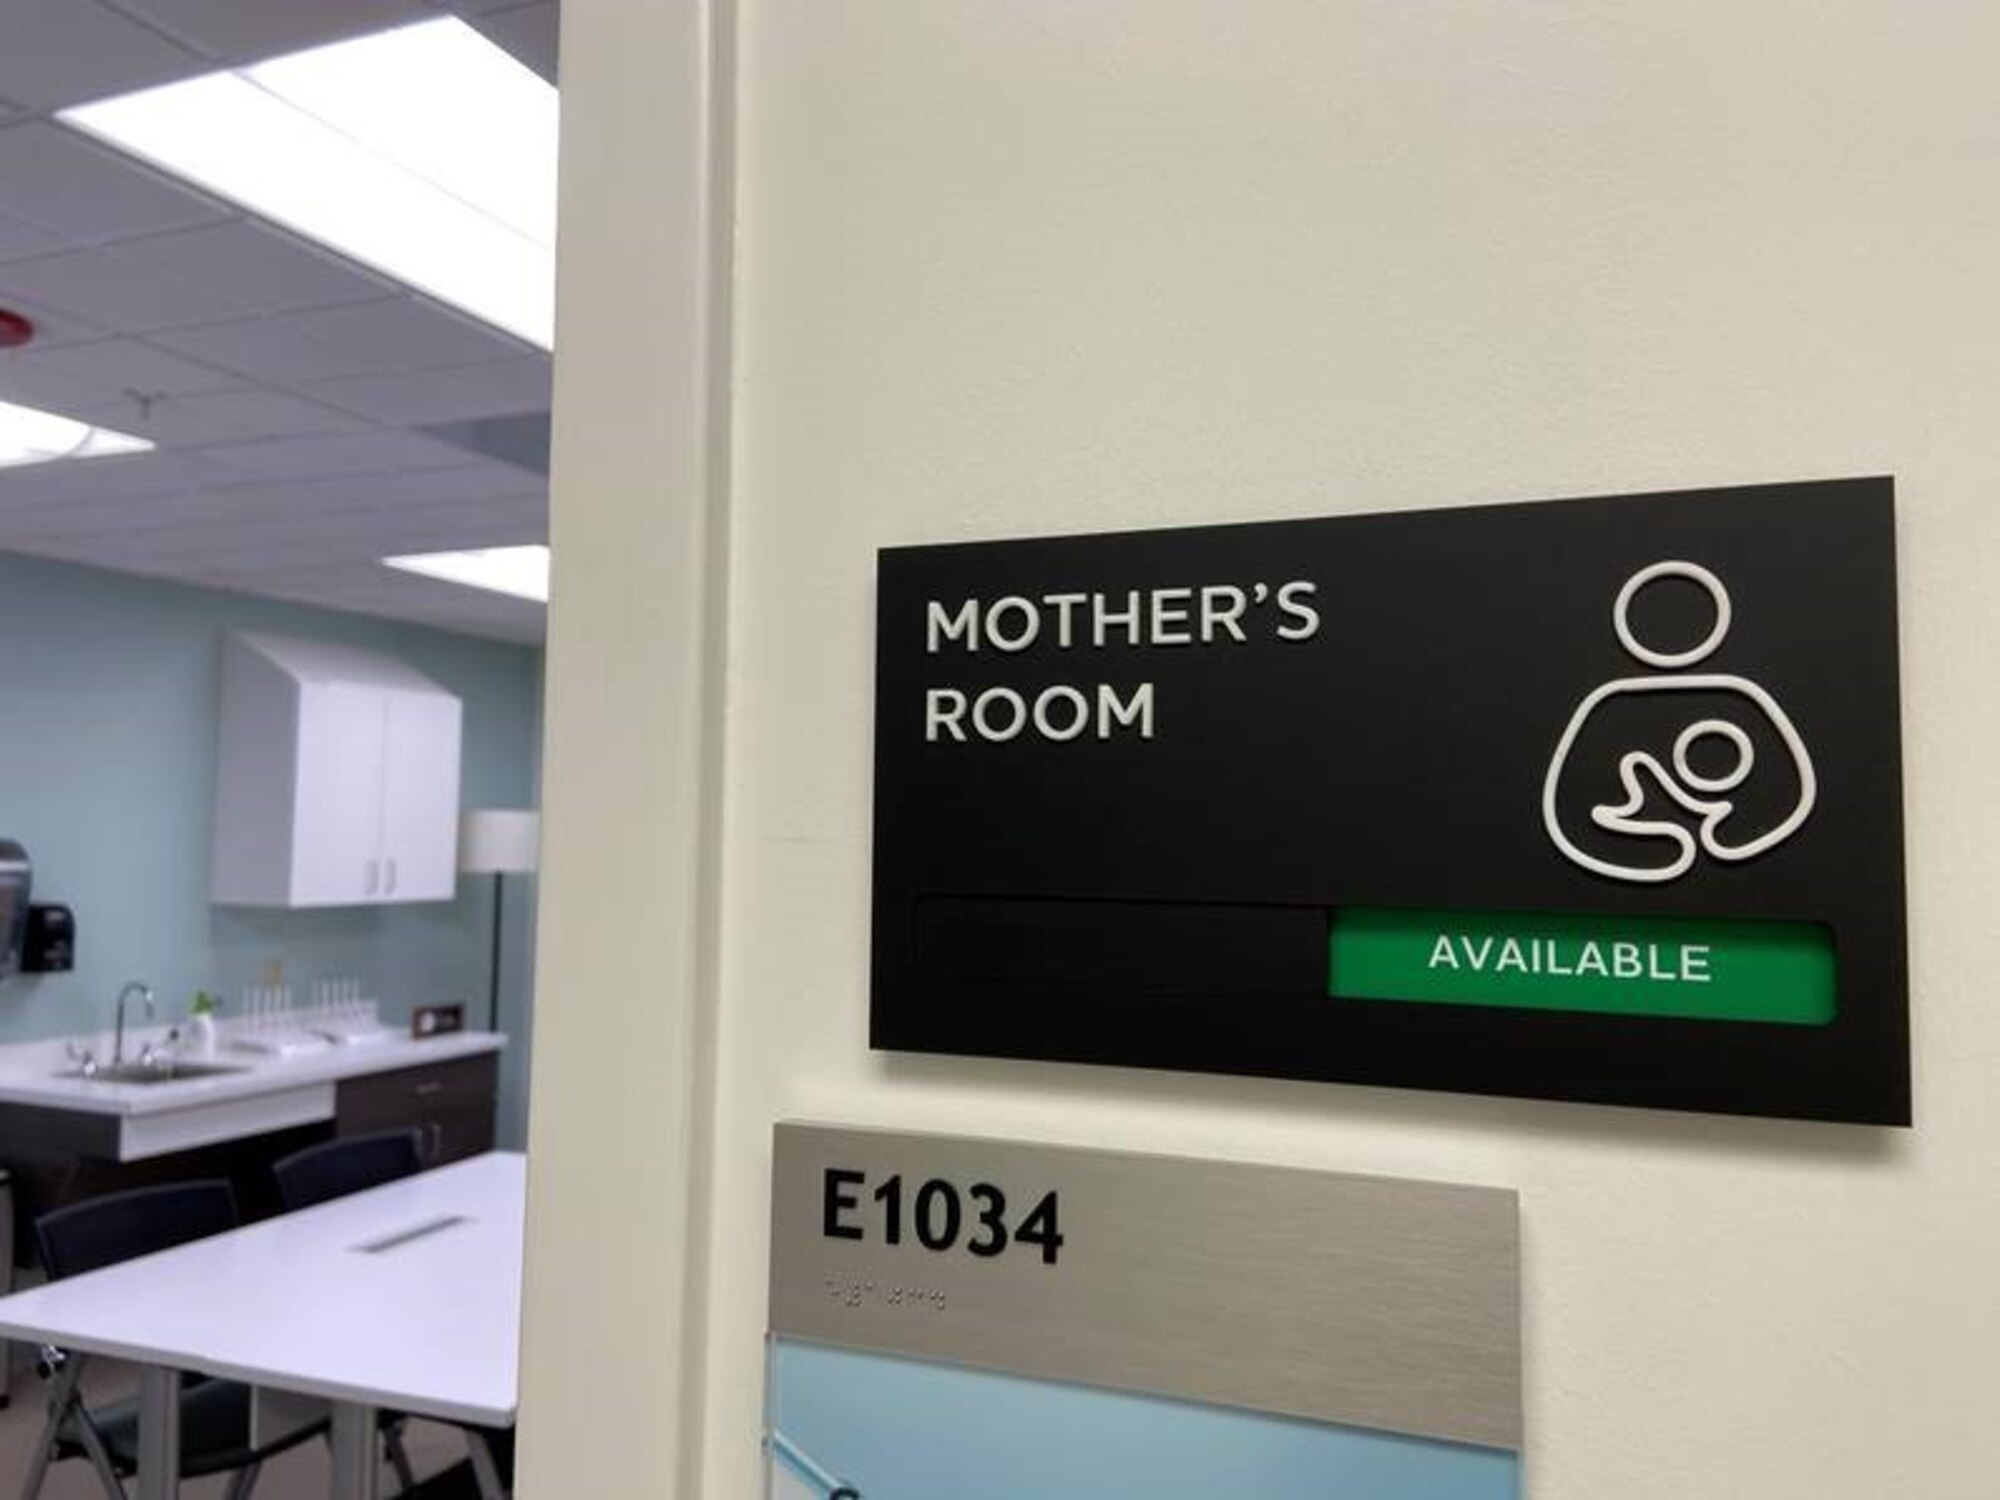 Photo shows the sign to a "Mother's Room."